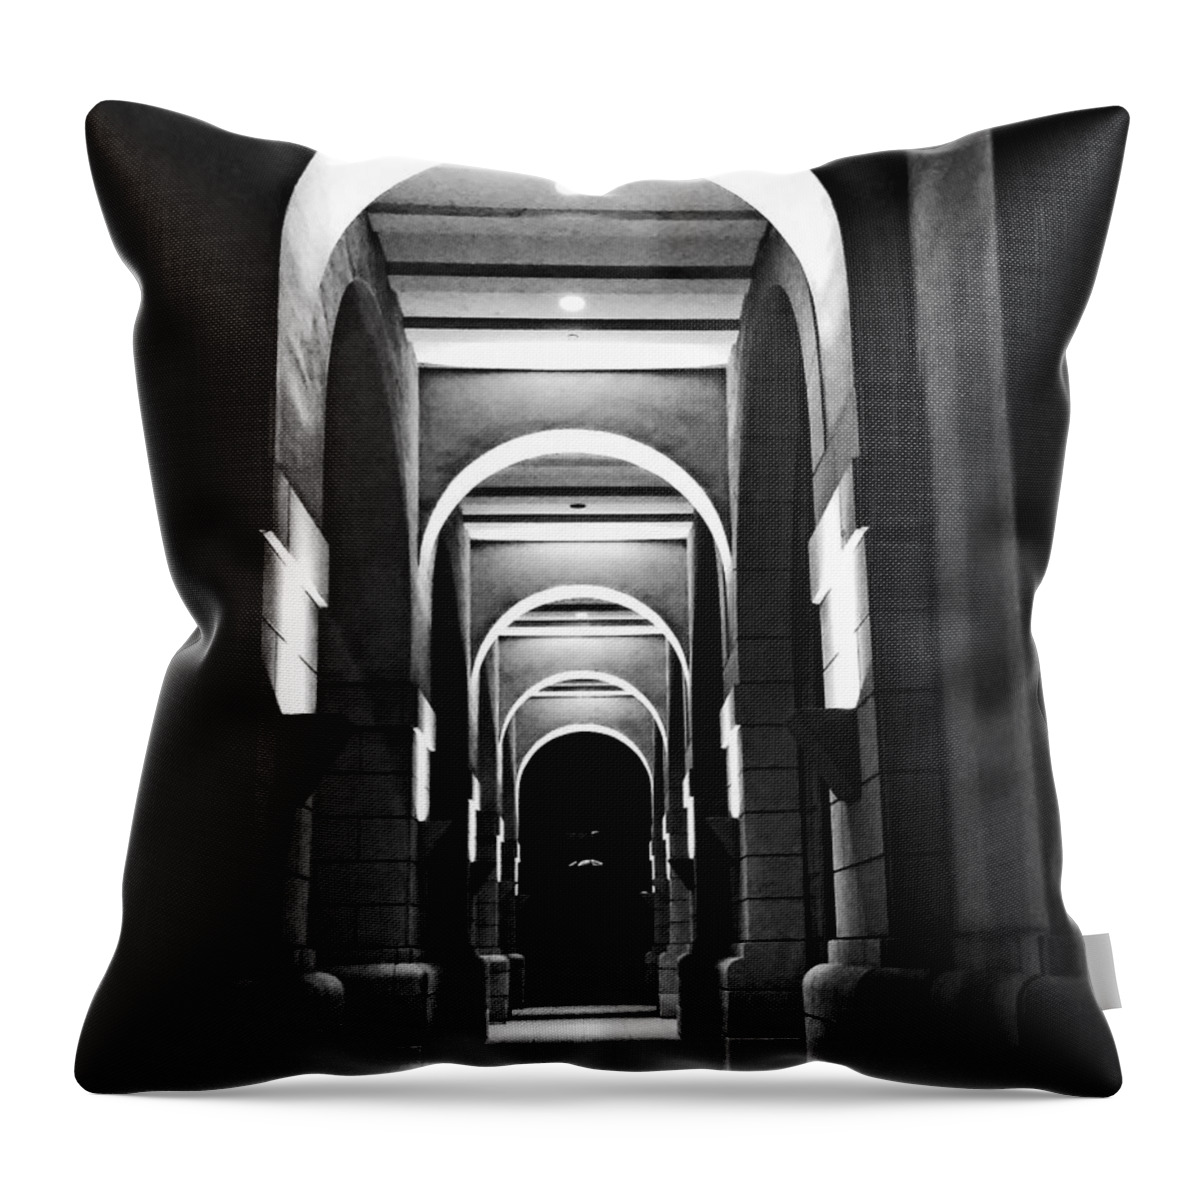 B/w Throw Pillow featuring the photograph b/w Archway by Andrew Lawrence